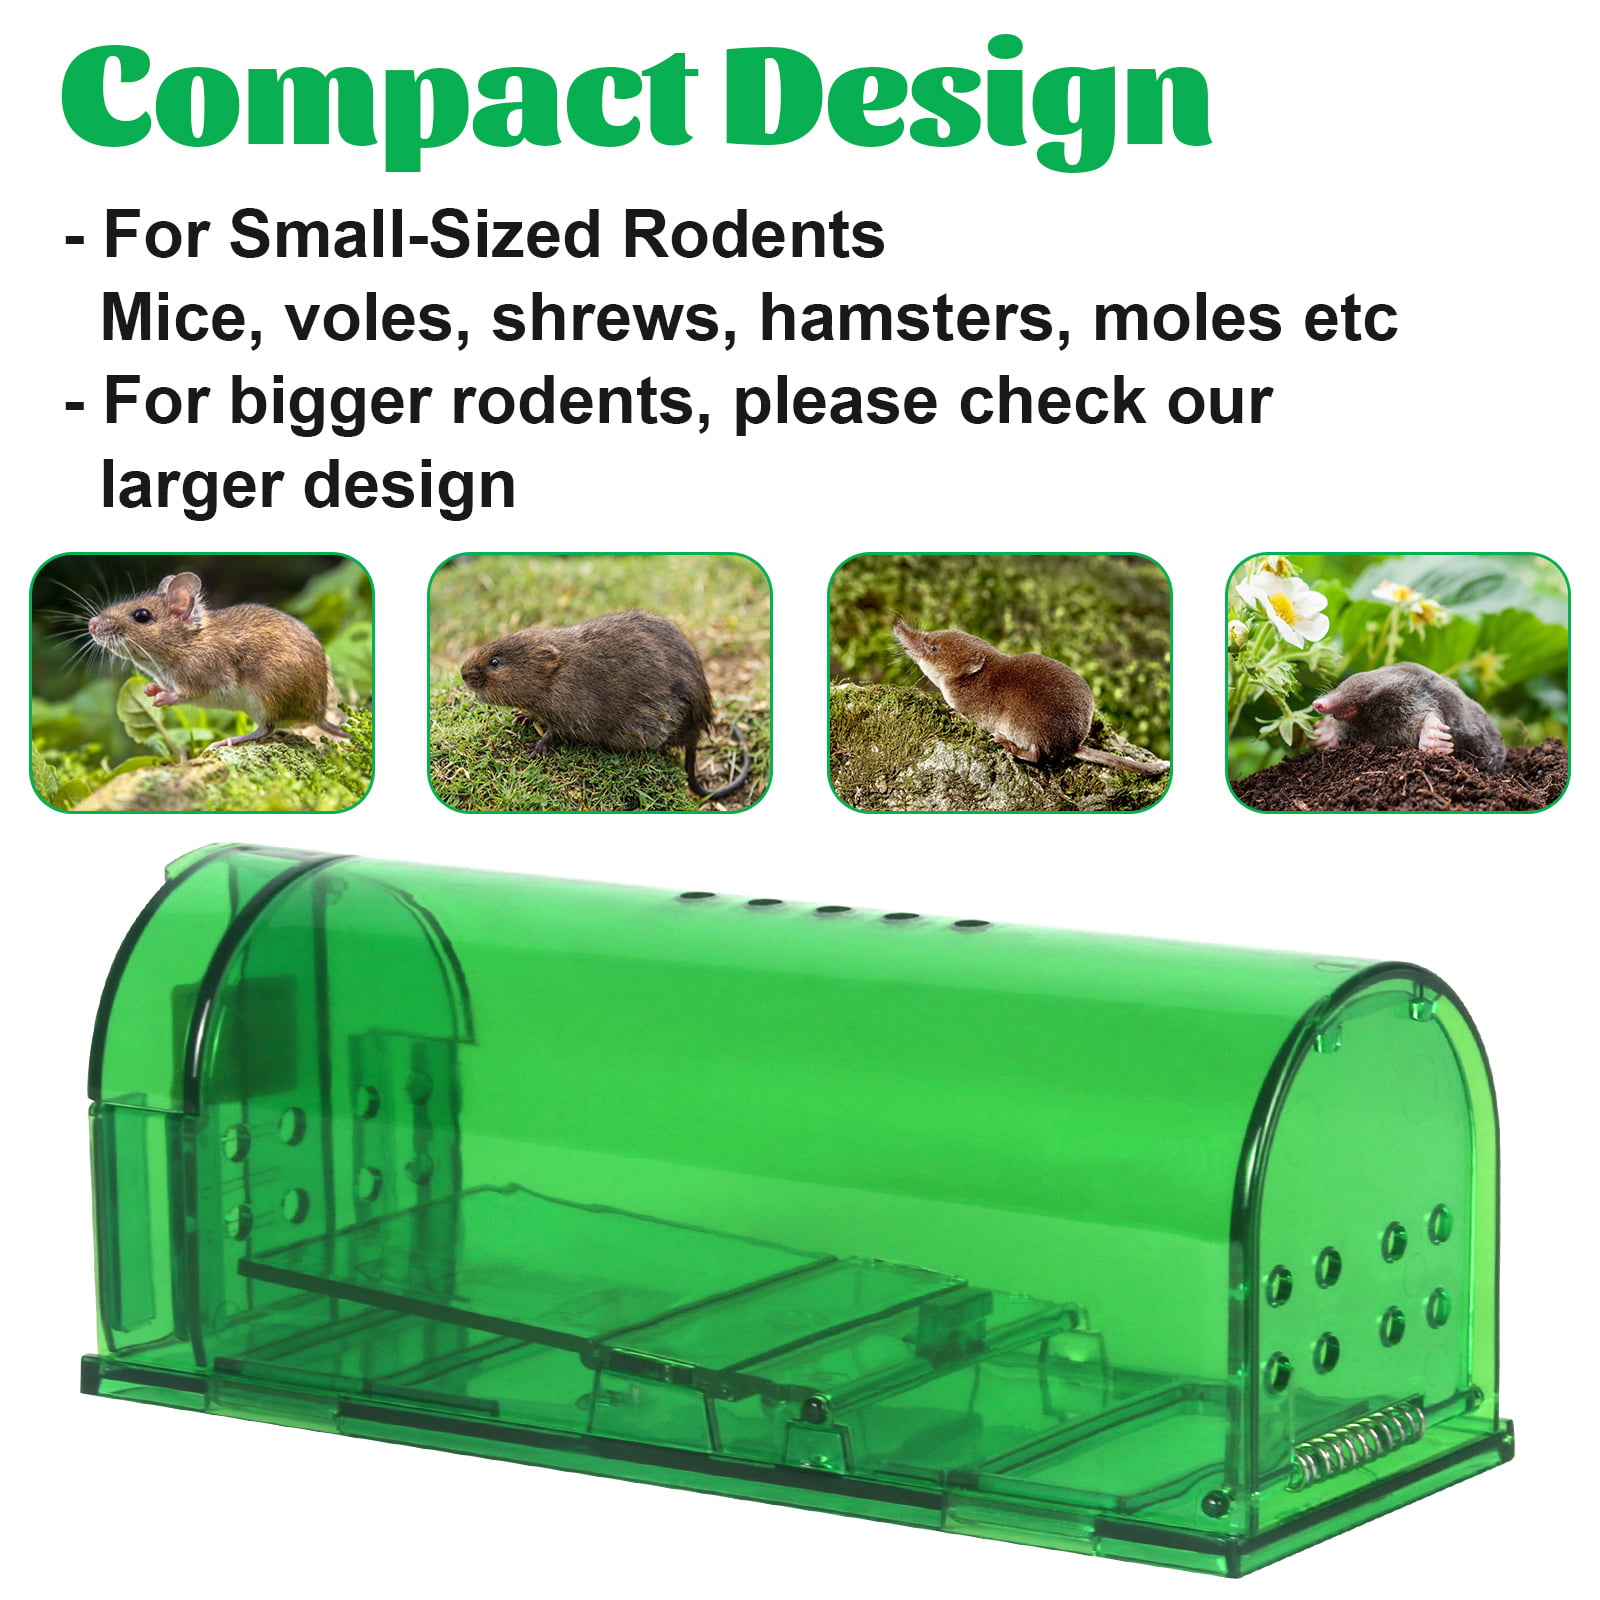 Original Humane Mouse Traps, Easy to Set, Kids/Pets Safe, Reusable for  Indoor/Outdoor use, for Small Rodent/Voles/Hamsters/Moles Catcher That  Works